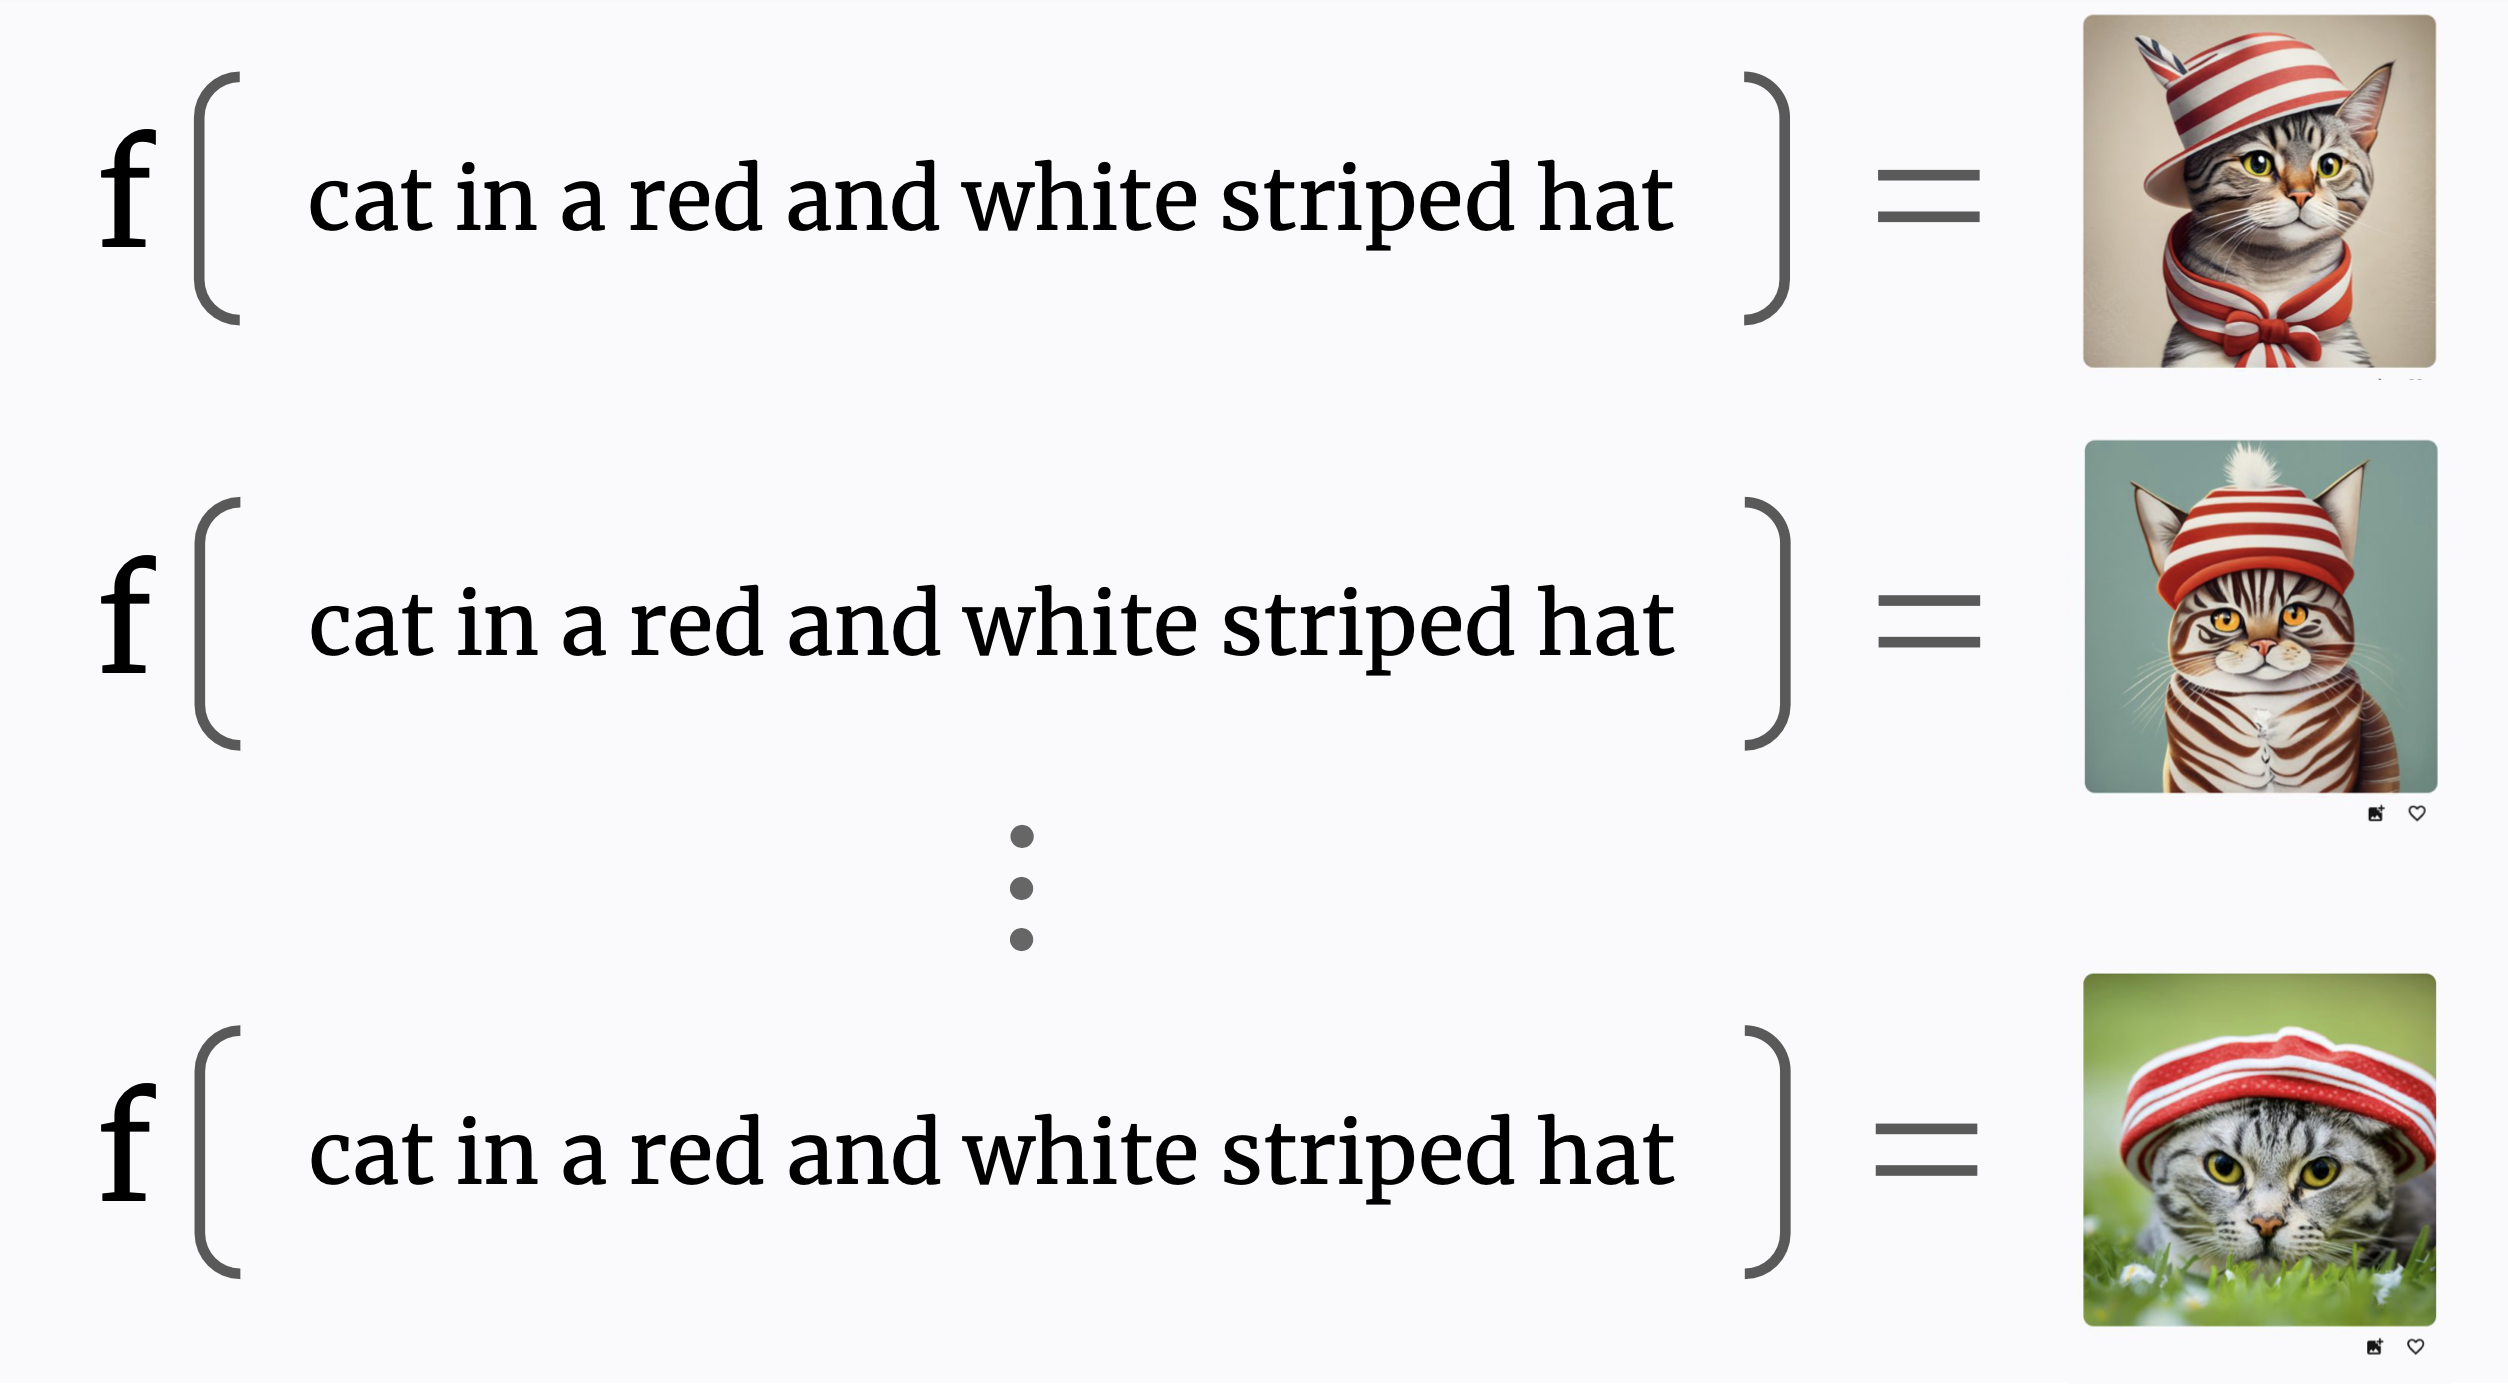 Multiple generations of ``cat in a red and white striped hat'' 